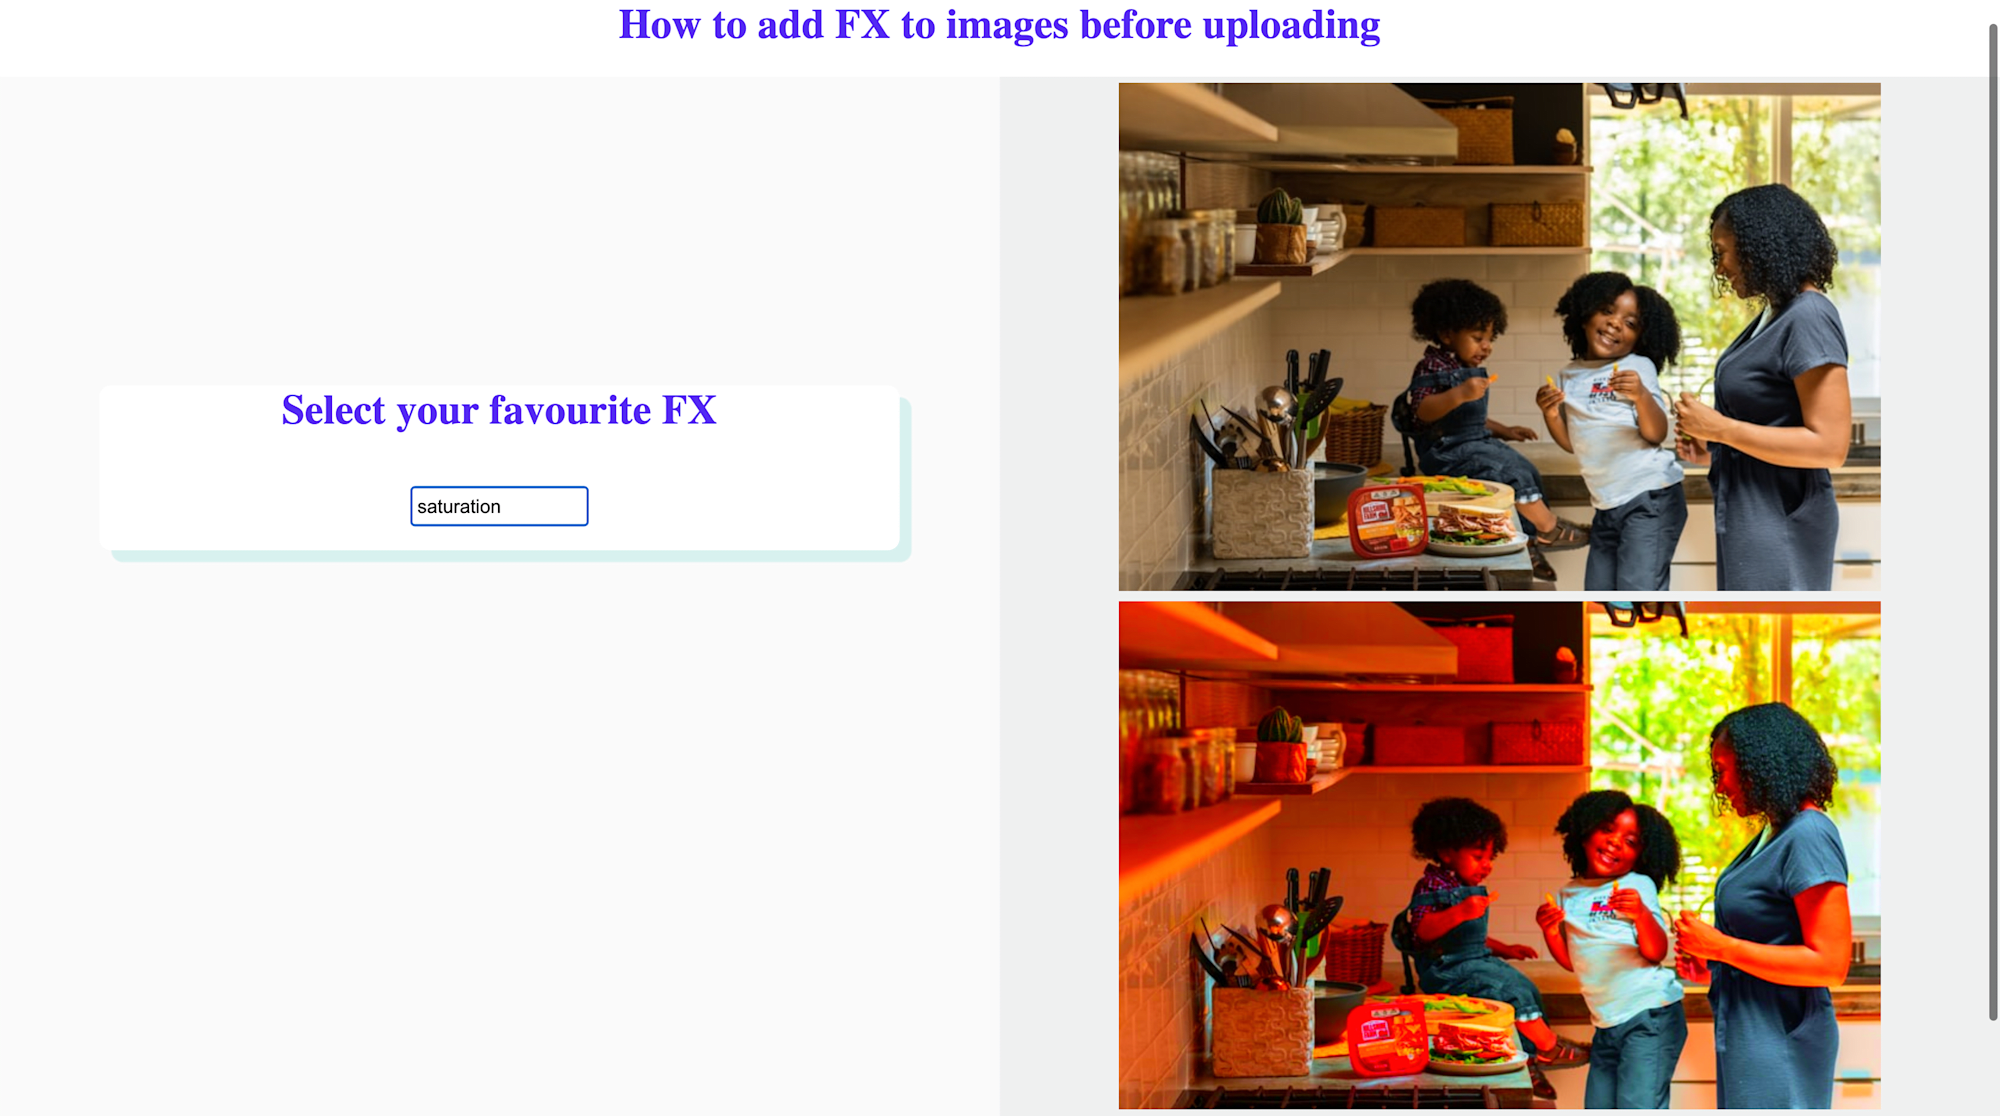 How to add FX to images before uploading